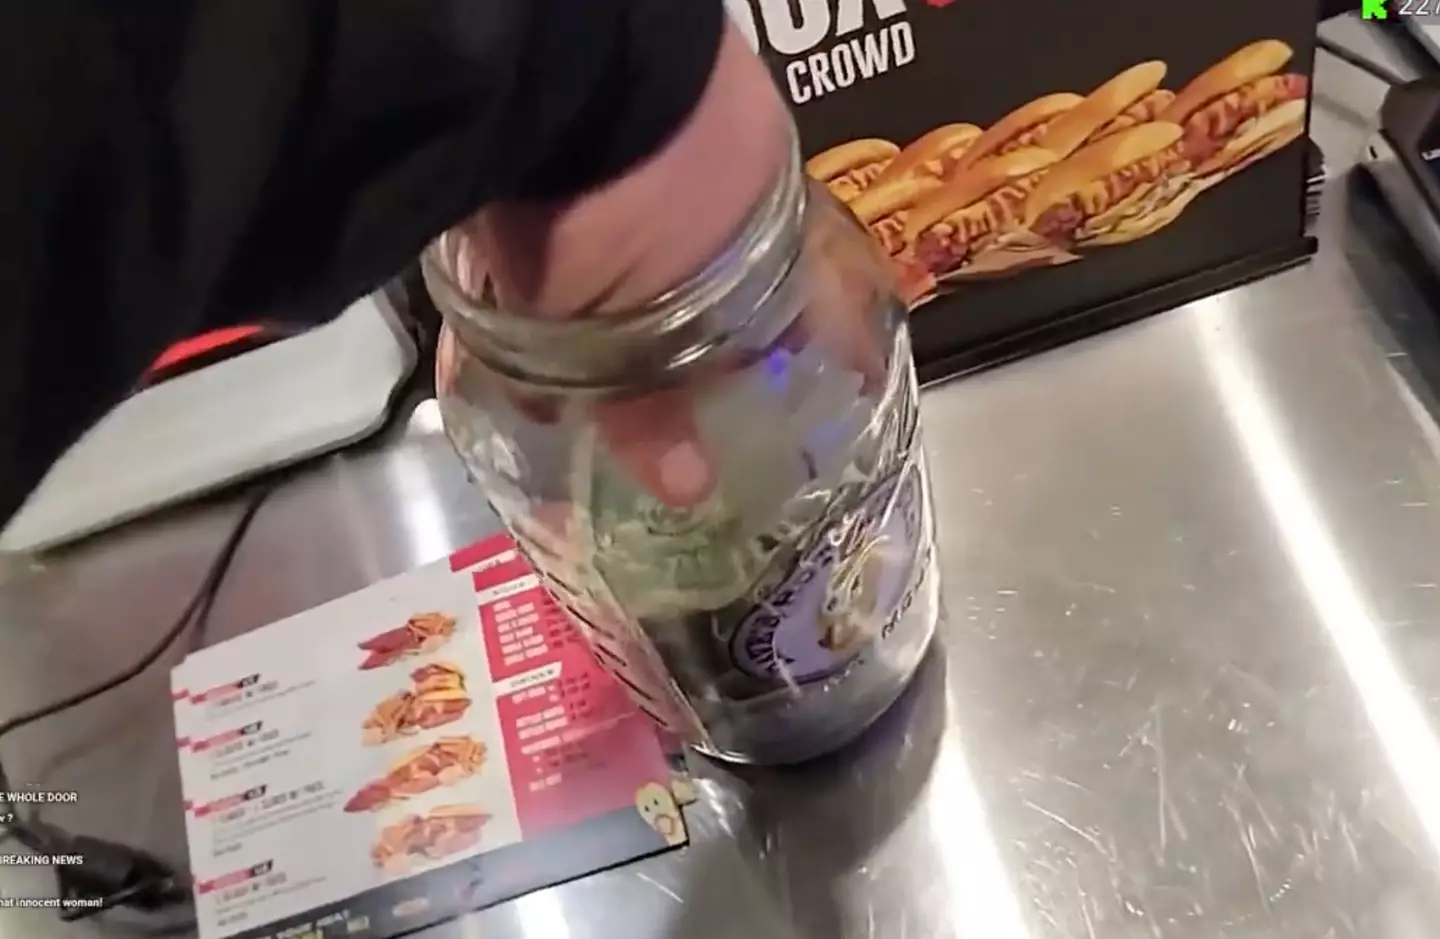 The video footage shows, in full view of his watching audience, the streamer pulled out a handful of notes from the tip jar.